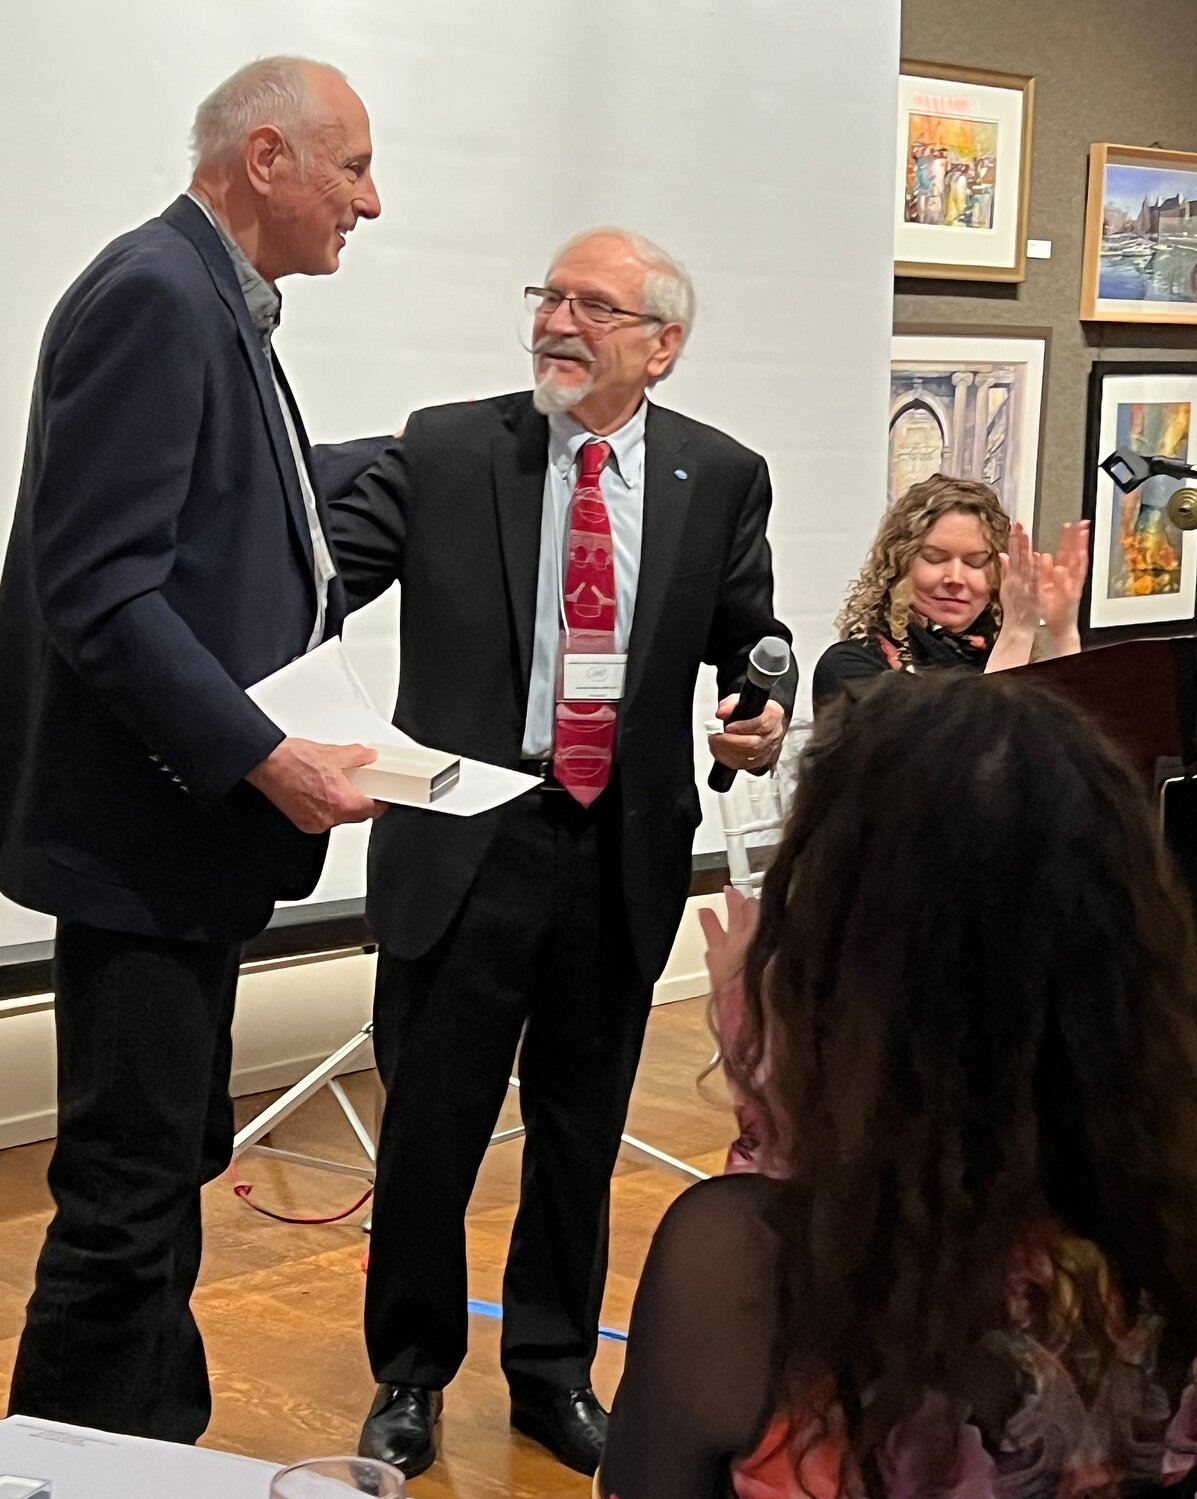 Crawfordsville’s well-known artist, Jerry Smith, was recently awarded top honors by the prestigious American Watercolor Society. Smith received the highest award, the Gold Medal of Honor, for his acrylic painting Rocky Reunion.